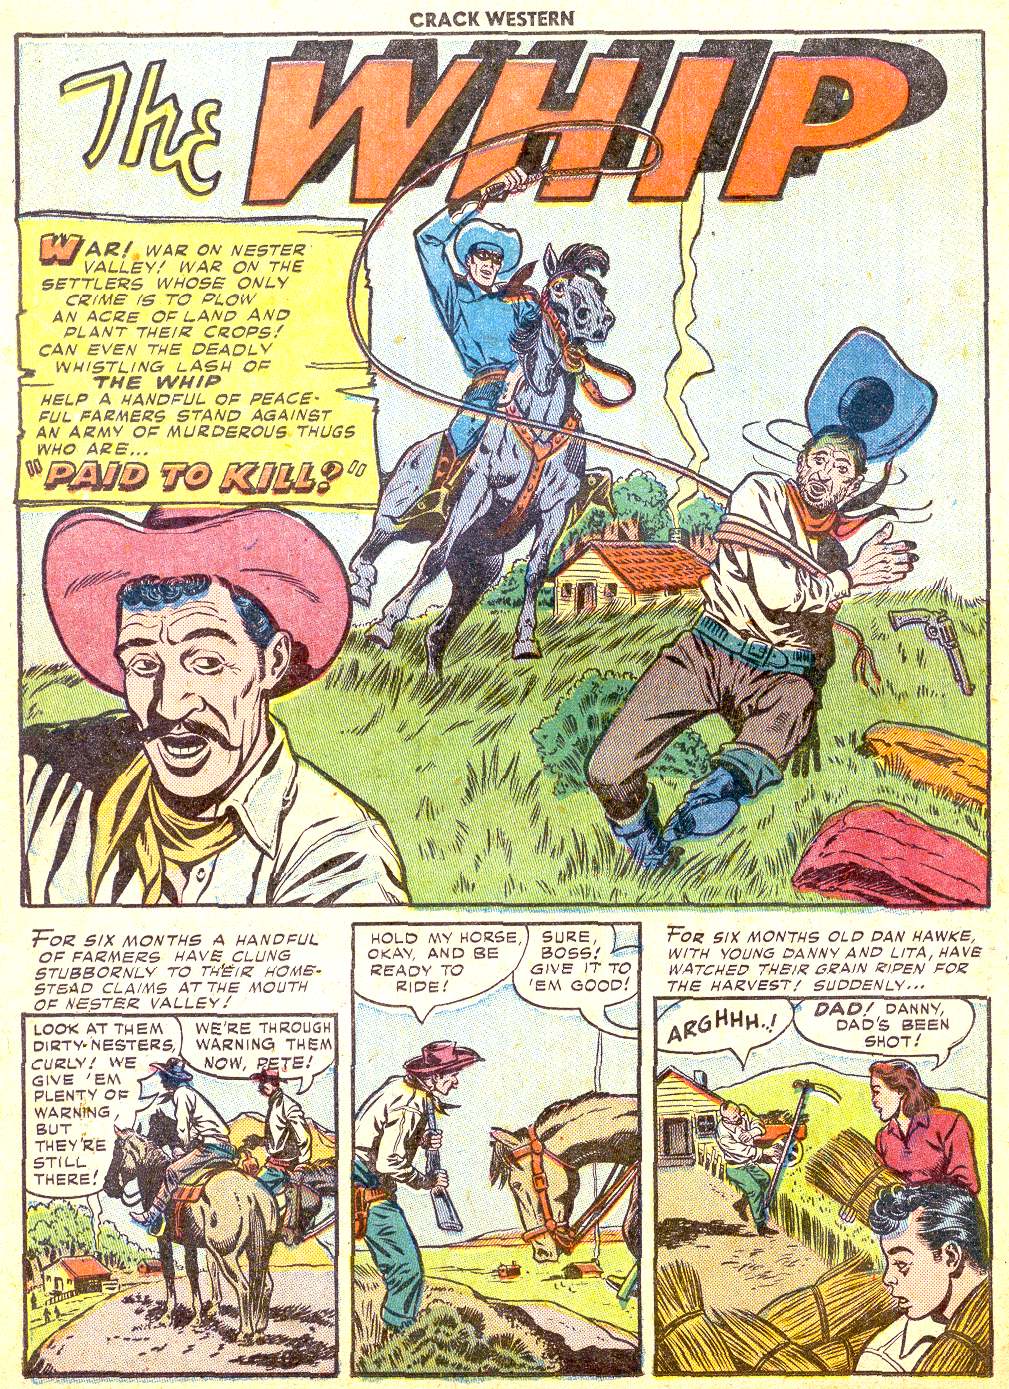 Read online Crack Western comic -  Issue #76 - 18